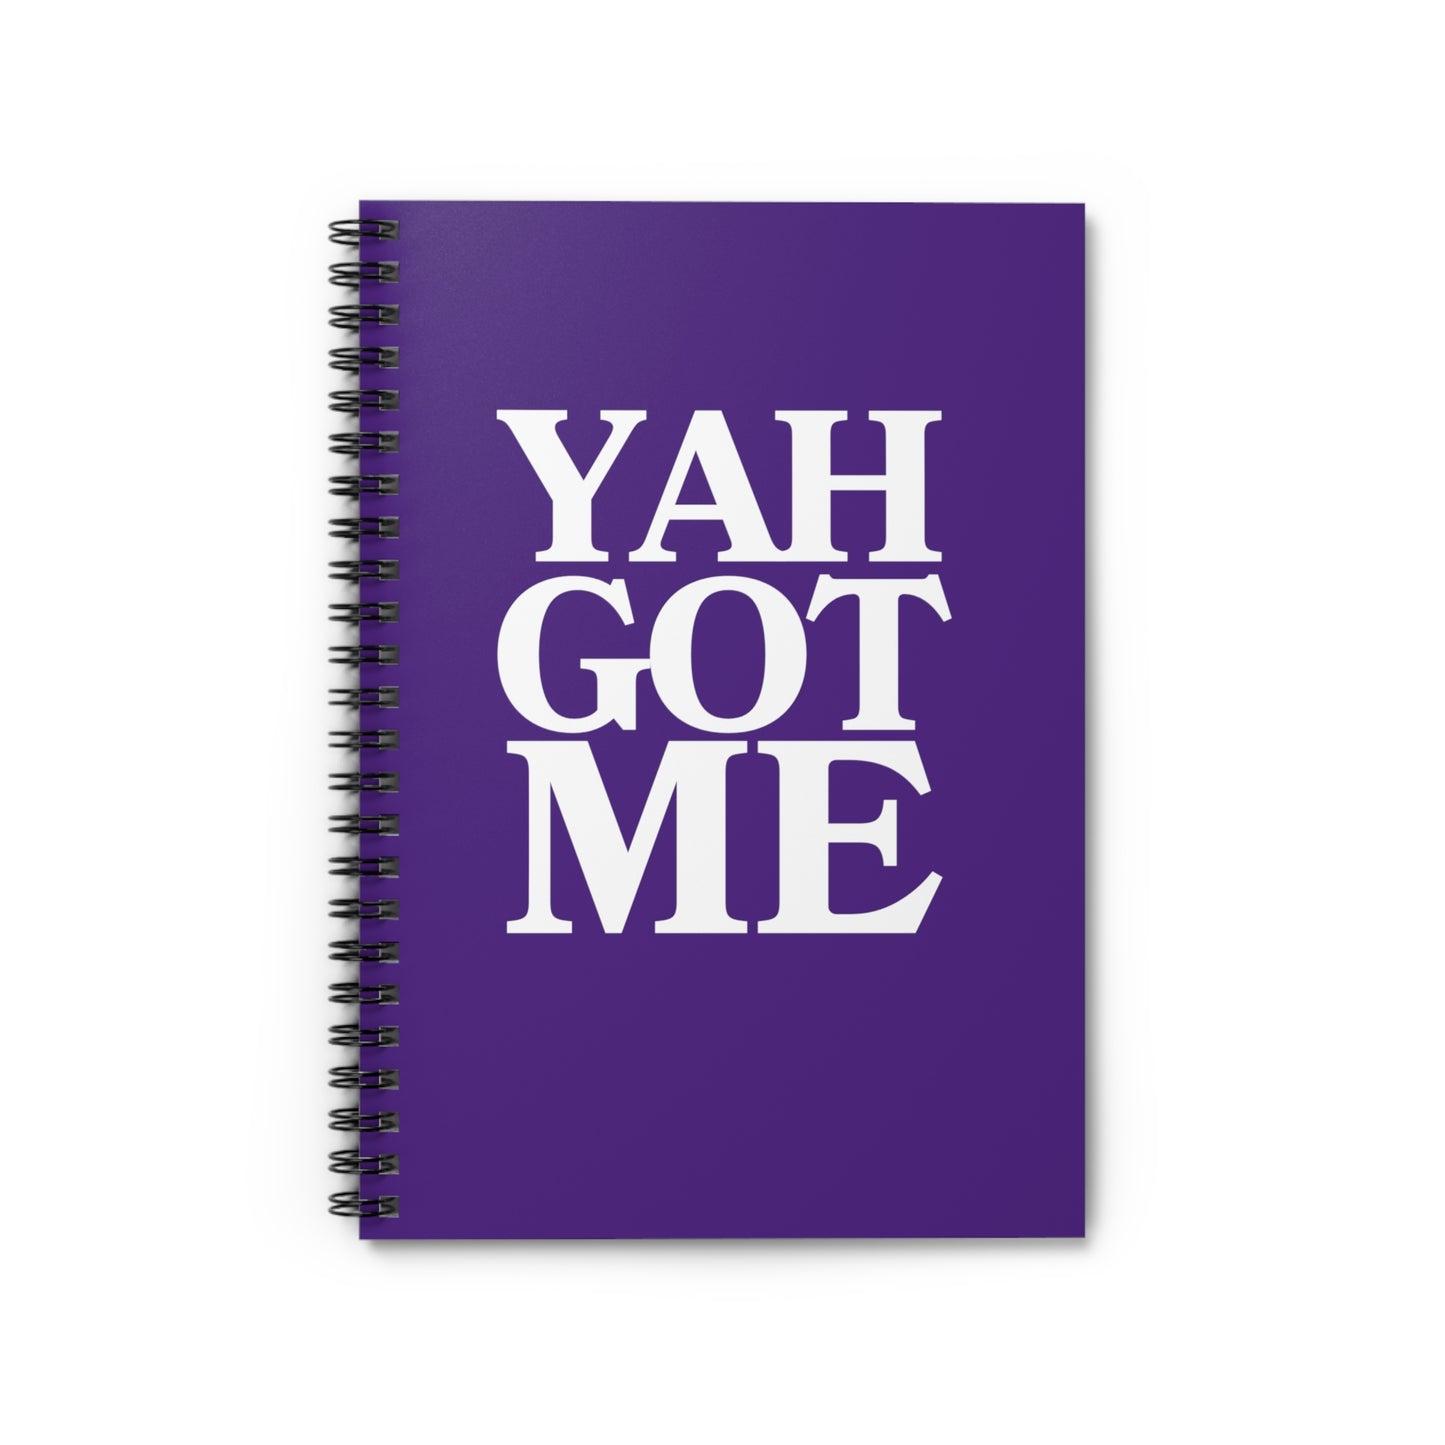 YAH GOT ME Purple Spiral Notebook Prayer Journal - 118 pages Ruled Line